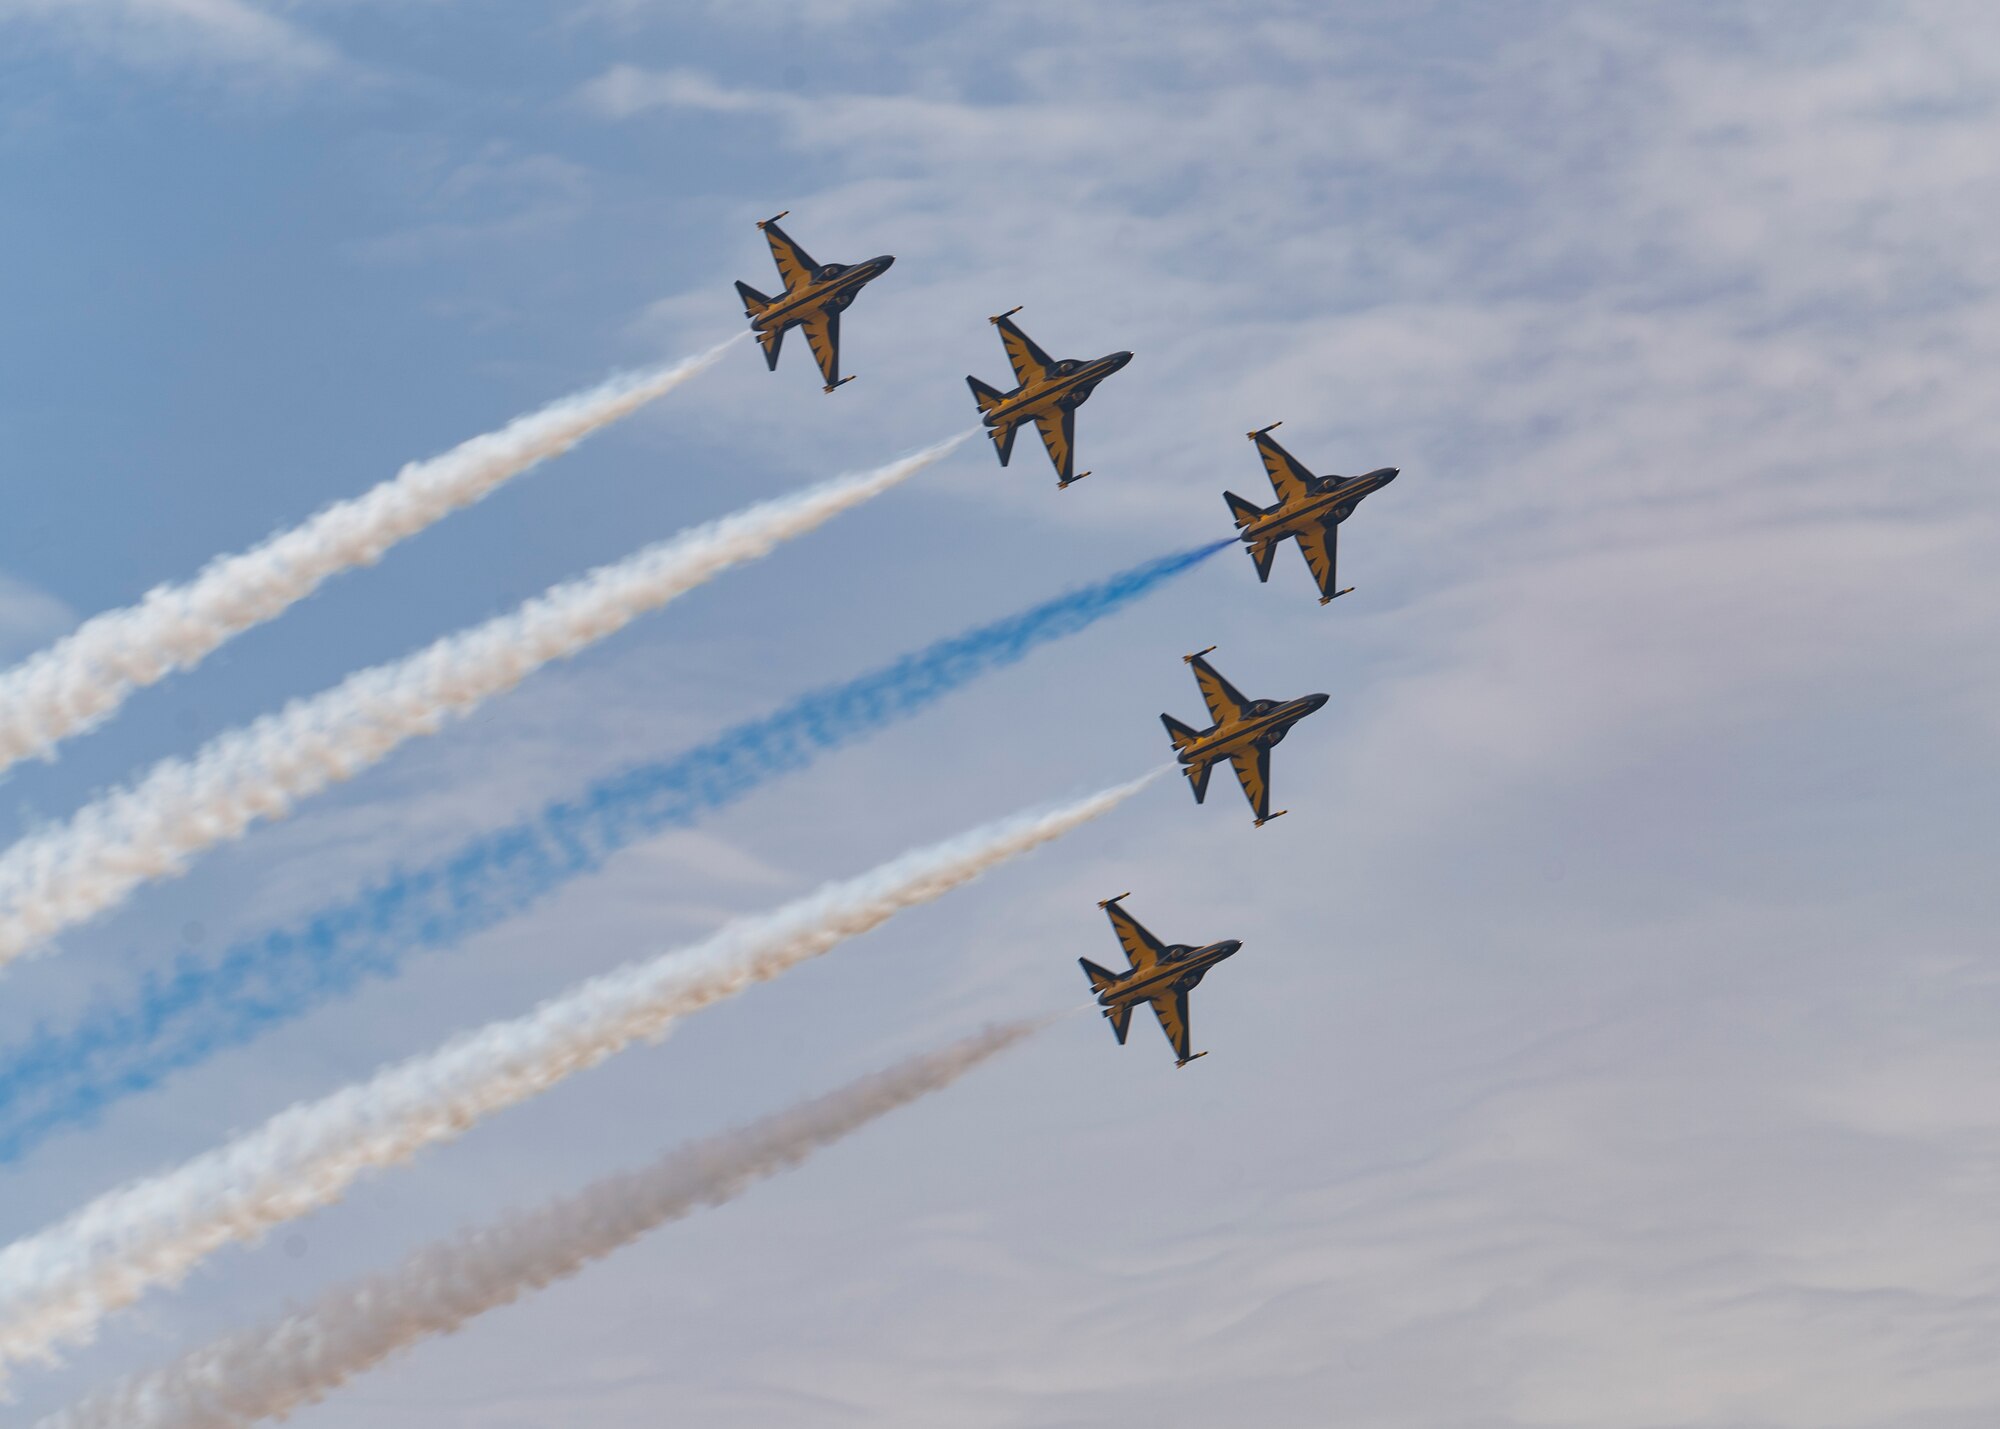 The Republic of Korea 53rd Air Demonstration Group better known as the Black Eagles, perform an aerial tricks in the sky.